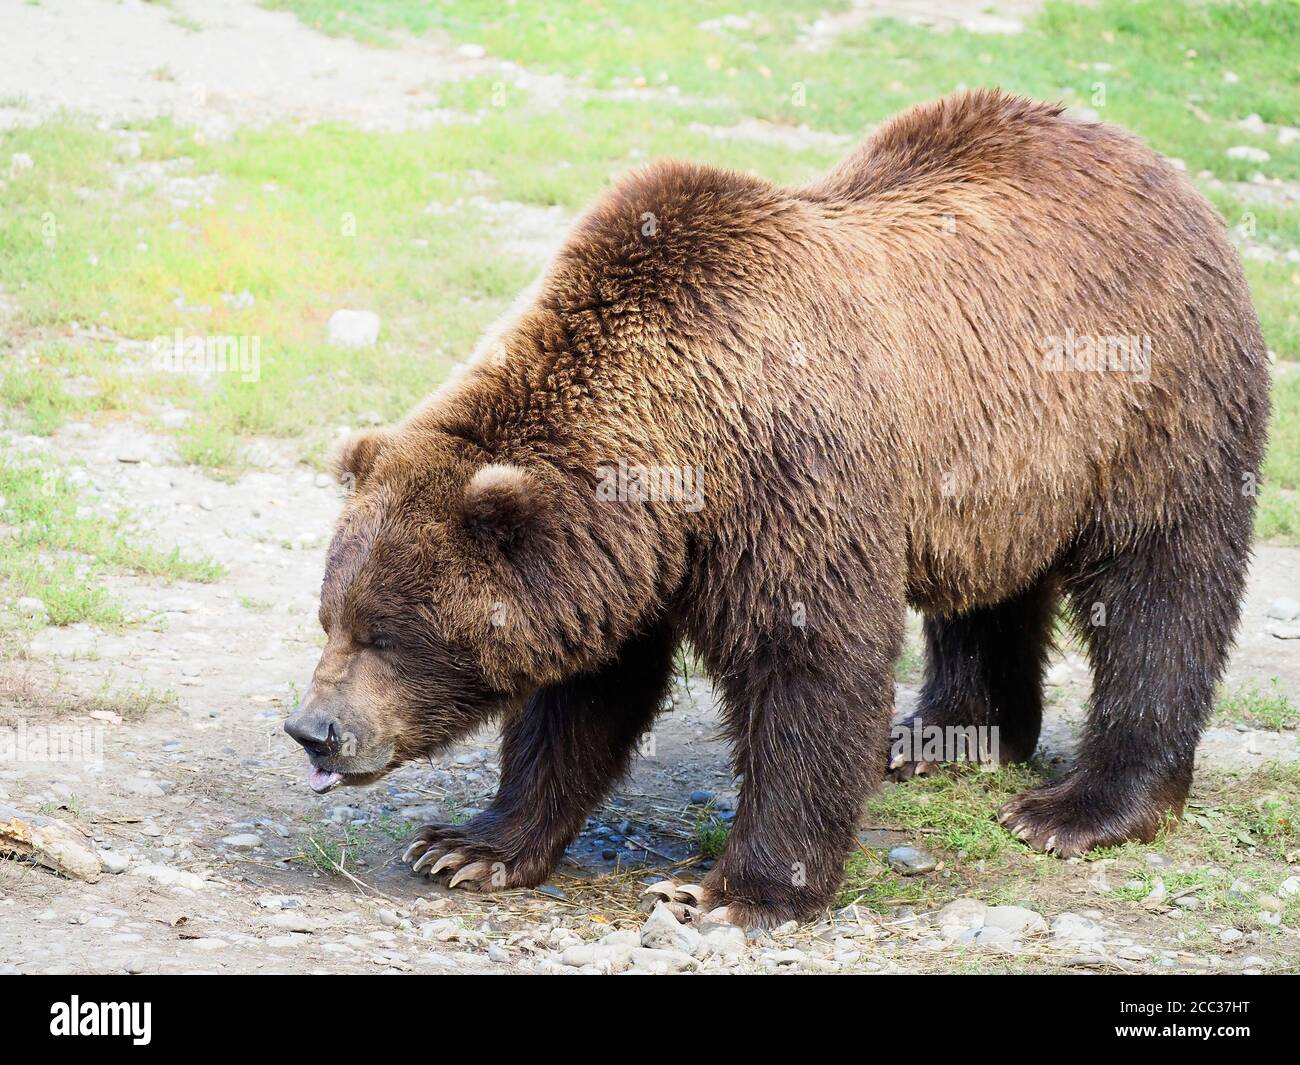 Closeup of a Large Male Grizzly or Brown Bear Stock Photo